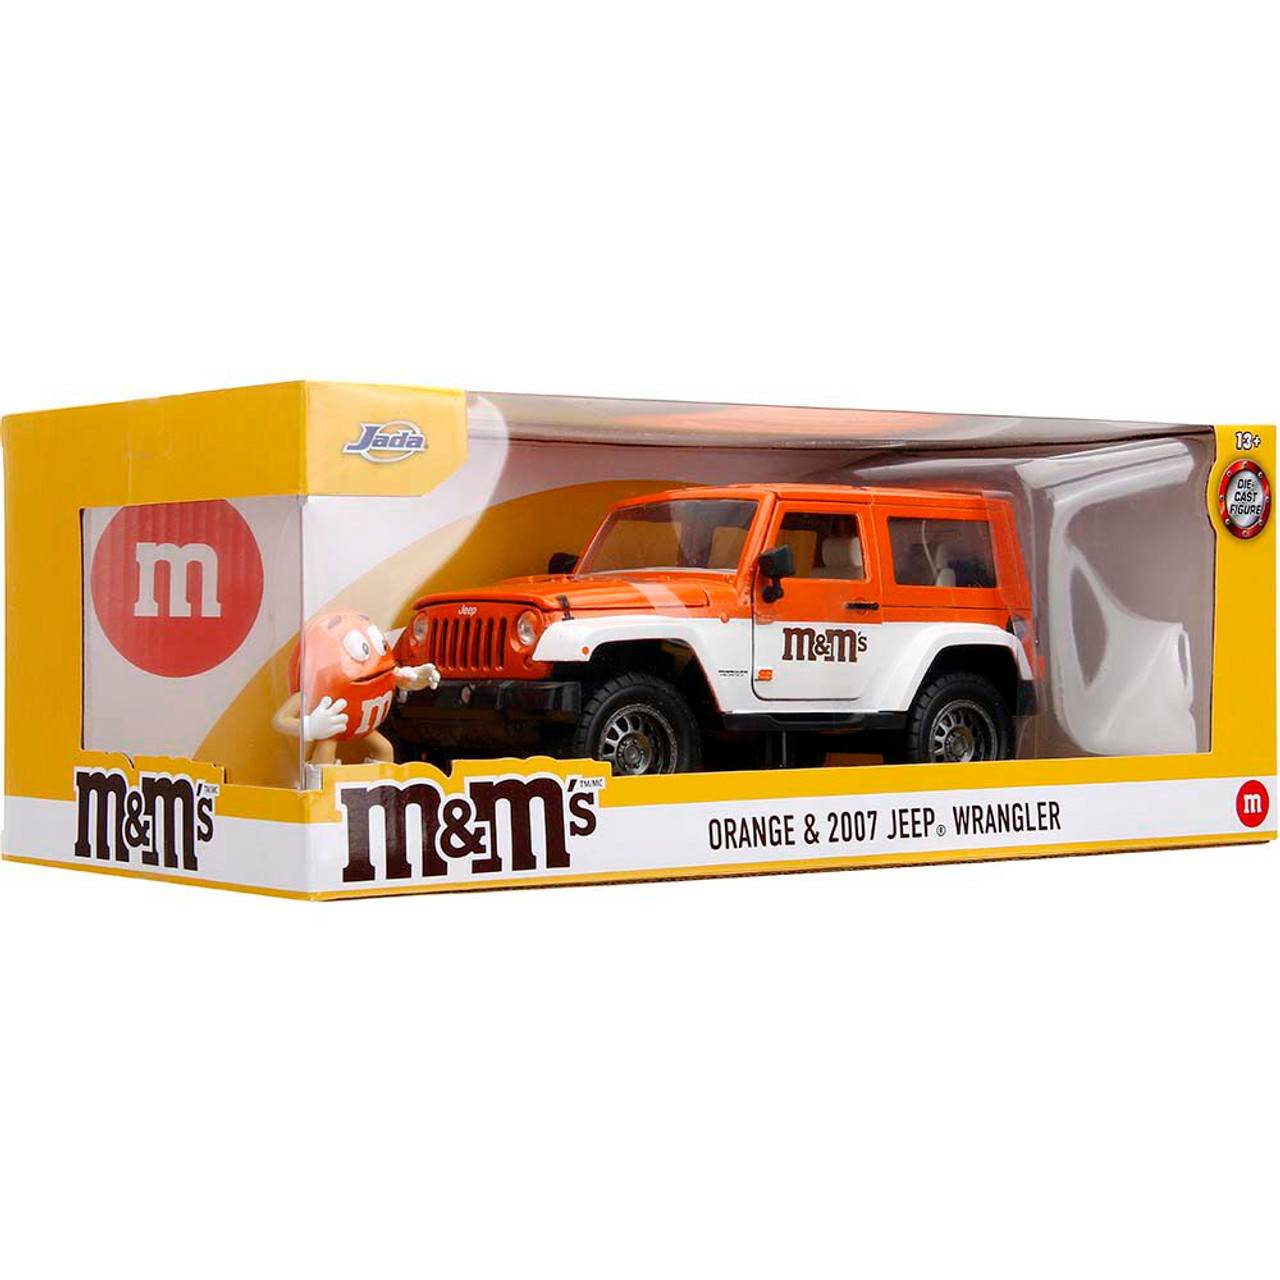 2007 Jeep Wrangler with Orange M&M's Figure 1:24 Scale Diecast Model Truck  by Jada Toys